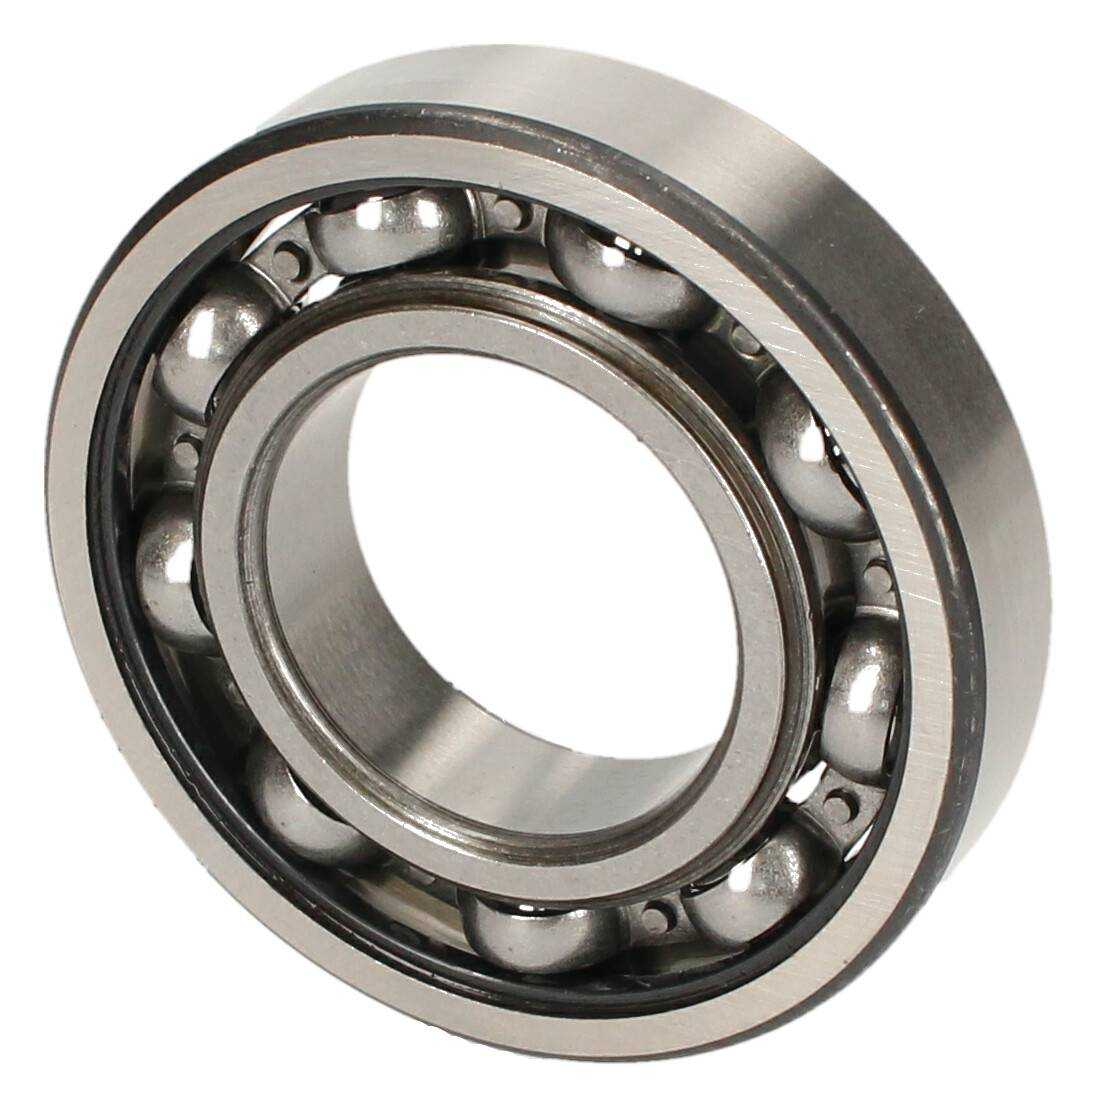 BALL BEARING 61903 SKF (WITHOUT PACKAGING) - Image 1